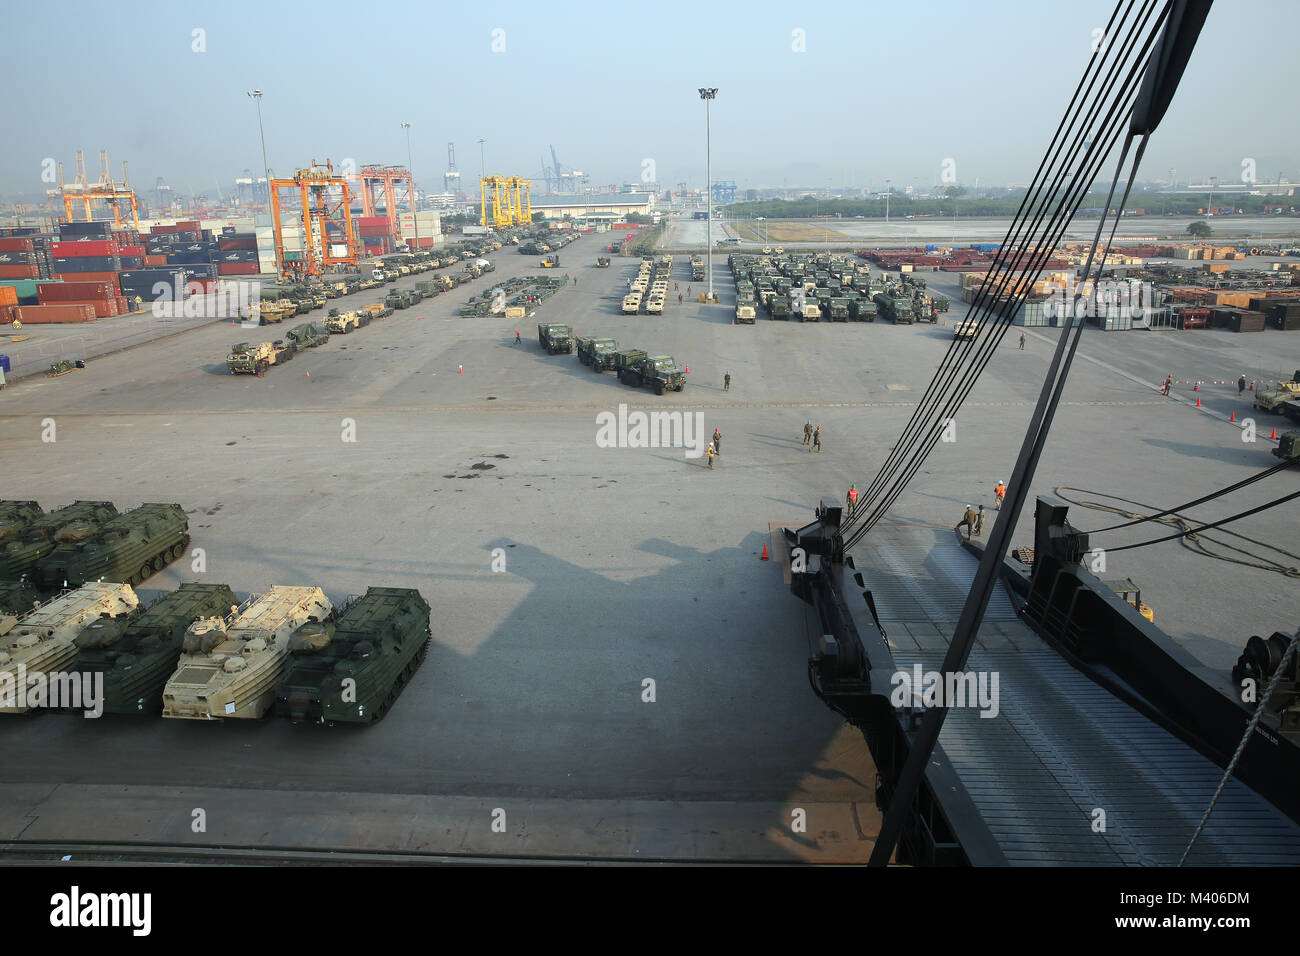 180206-N-IX266-010 LAEM CHABANG, Thailand—Military vehicles are staged at the port here during an offload of Military Sealift Command’s (MSC) large, medium-speed, roll-on/roll-off ship USNS Pililaau (T-AK 304) in support of Cobra Gold 2018 (CG18), Feb. 5. The USNS Pililaau is part of Maritime Prepositioning Ships Squadron THREE, which consists of a fleet of government-owned ships operated by MSC and is based in the Guam-Saipan area of the Western Pacific Ocean. CG18 is a Thailand and United States co-sponsored exercise conducted annually in the Kingdom of Thailand. (U.S. Navy photo by Grady T. Stock Photo